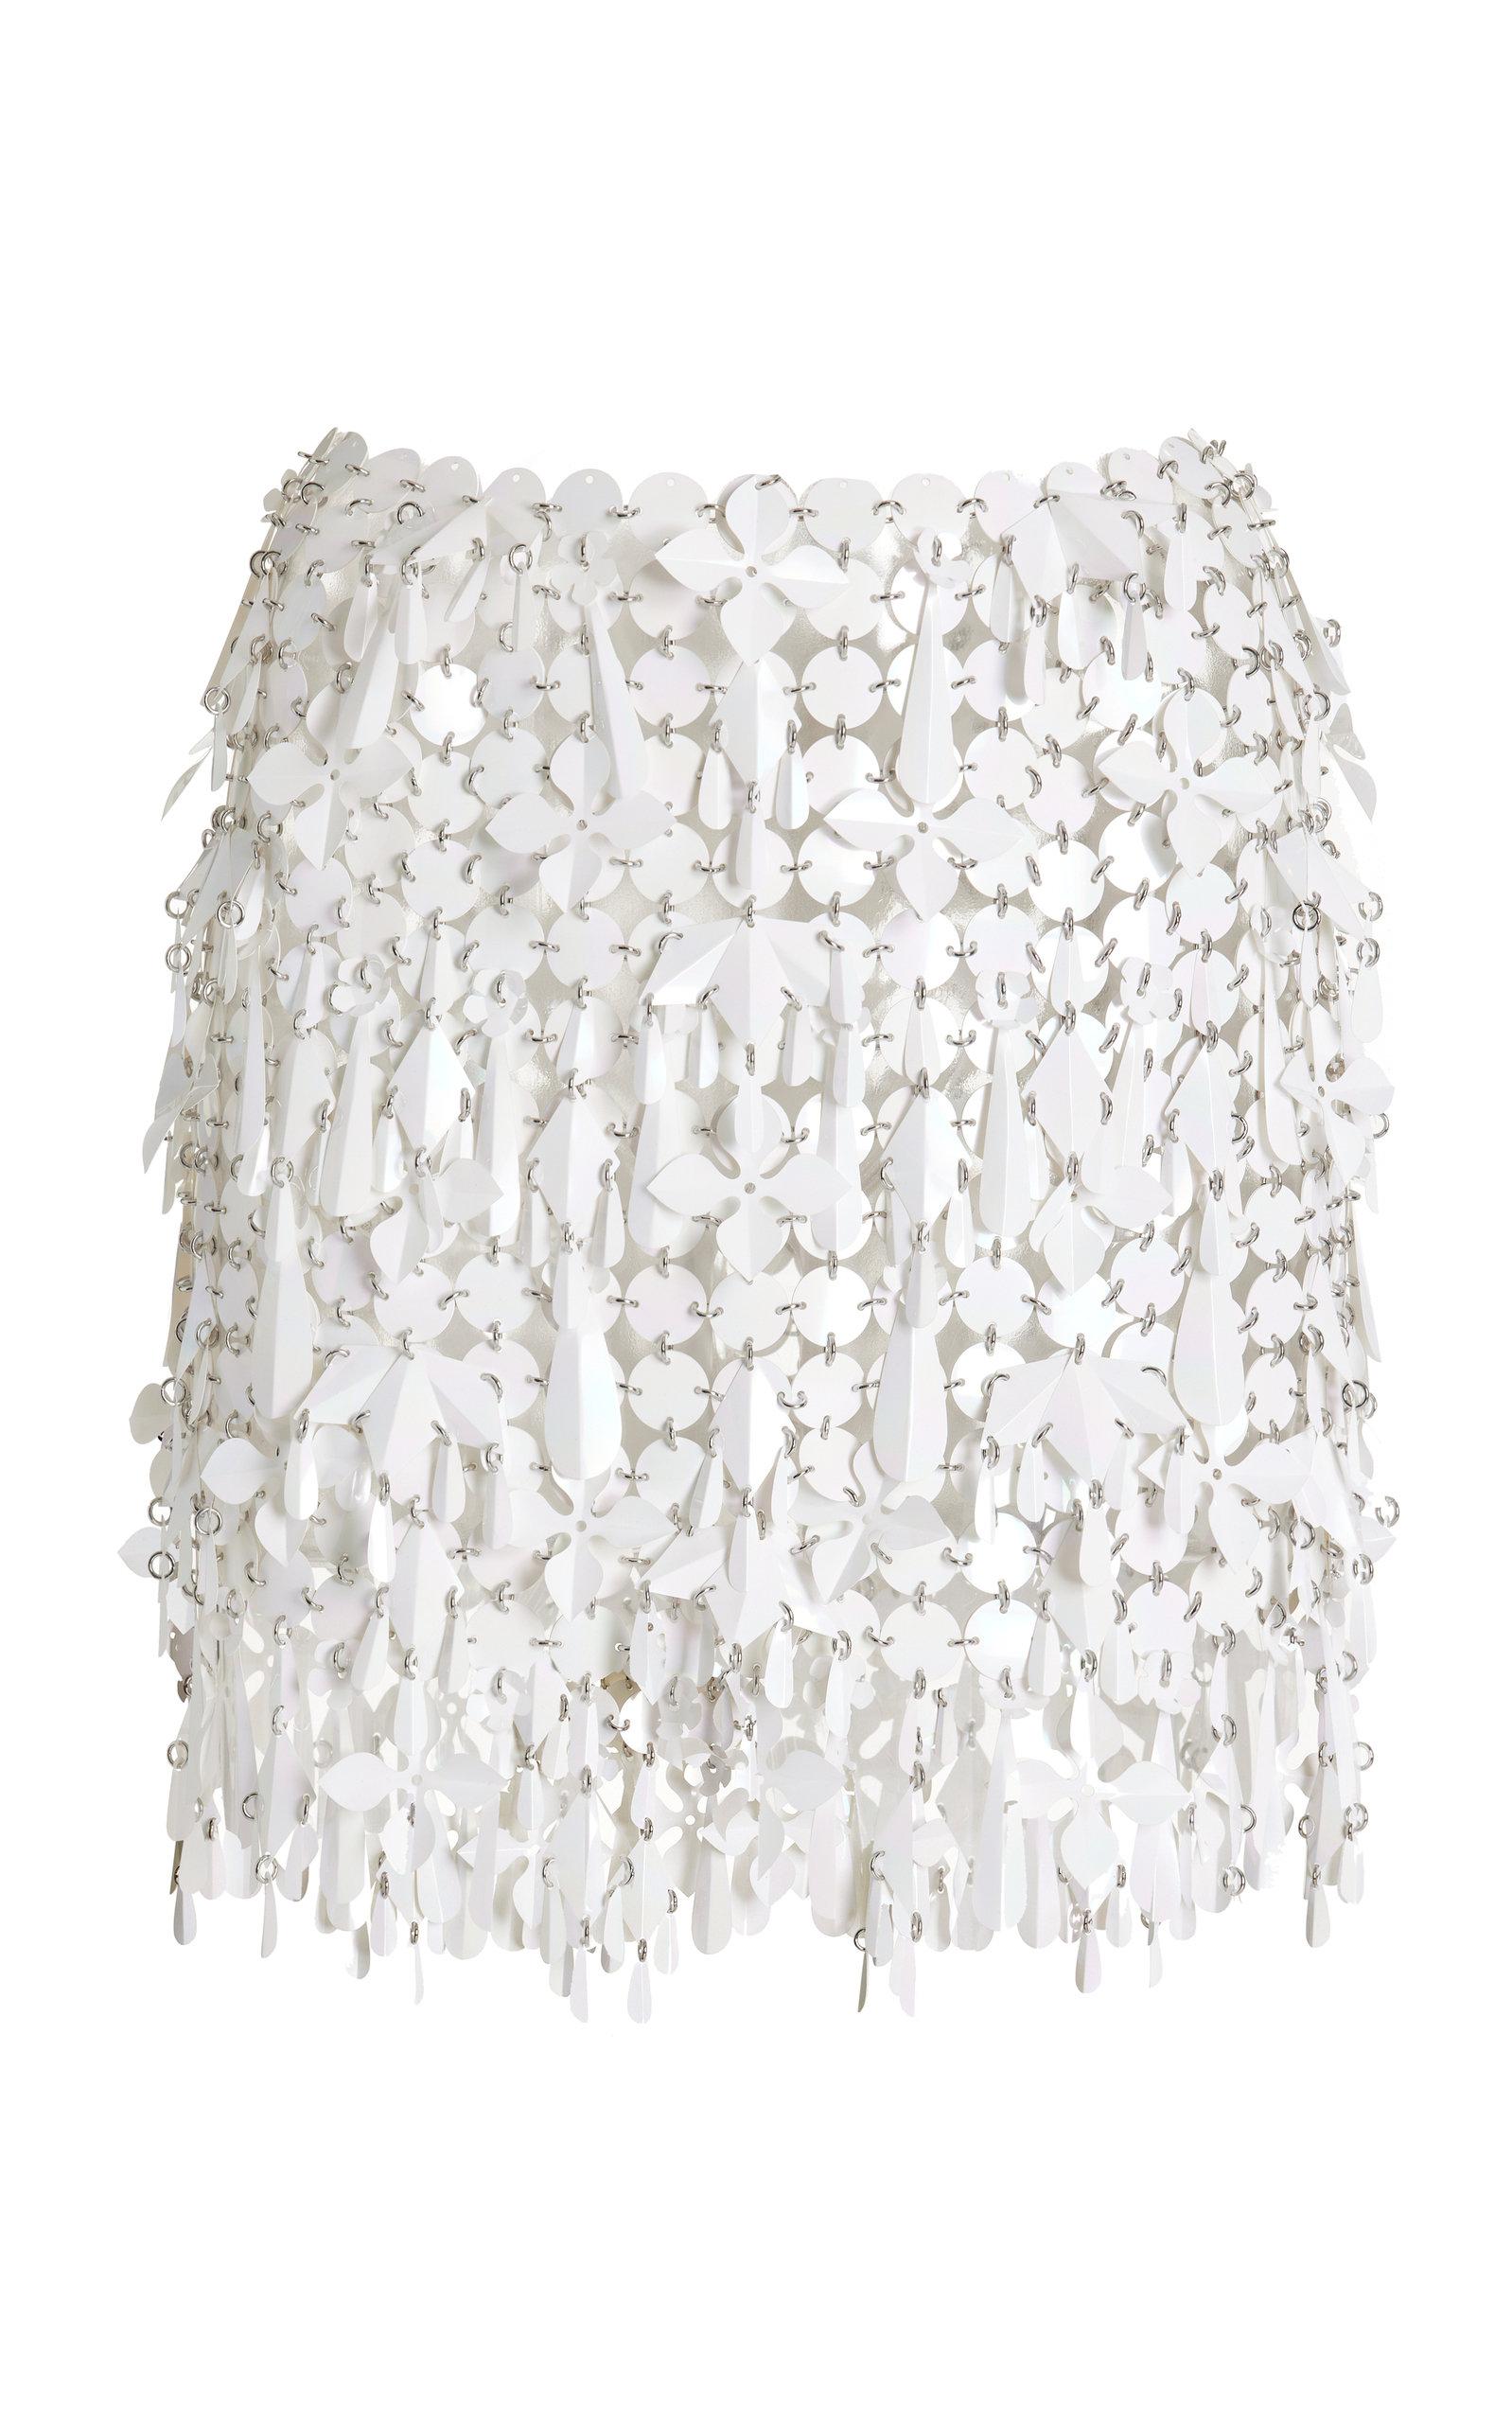 Paco Rabanne Exclusive Assemblage Mini Skirt in White | Lyst UK